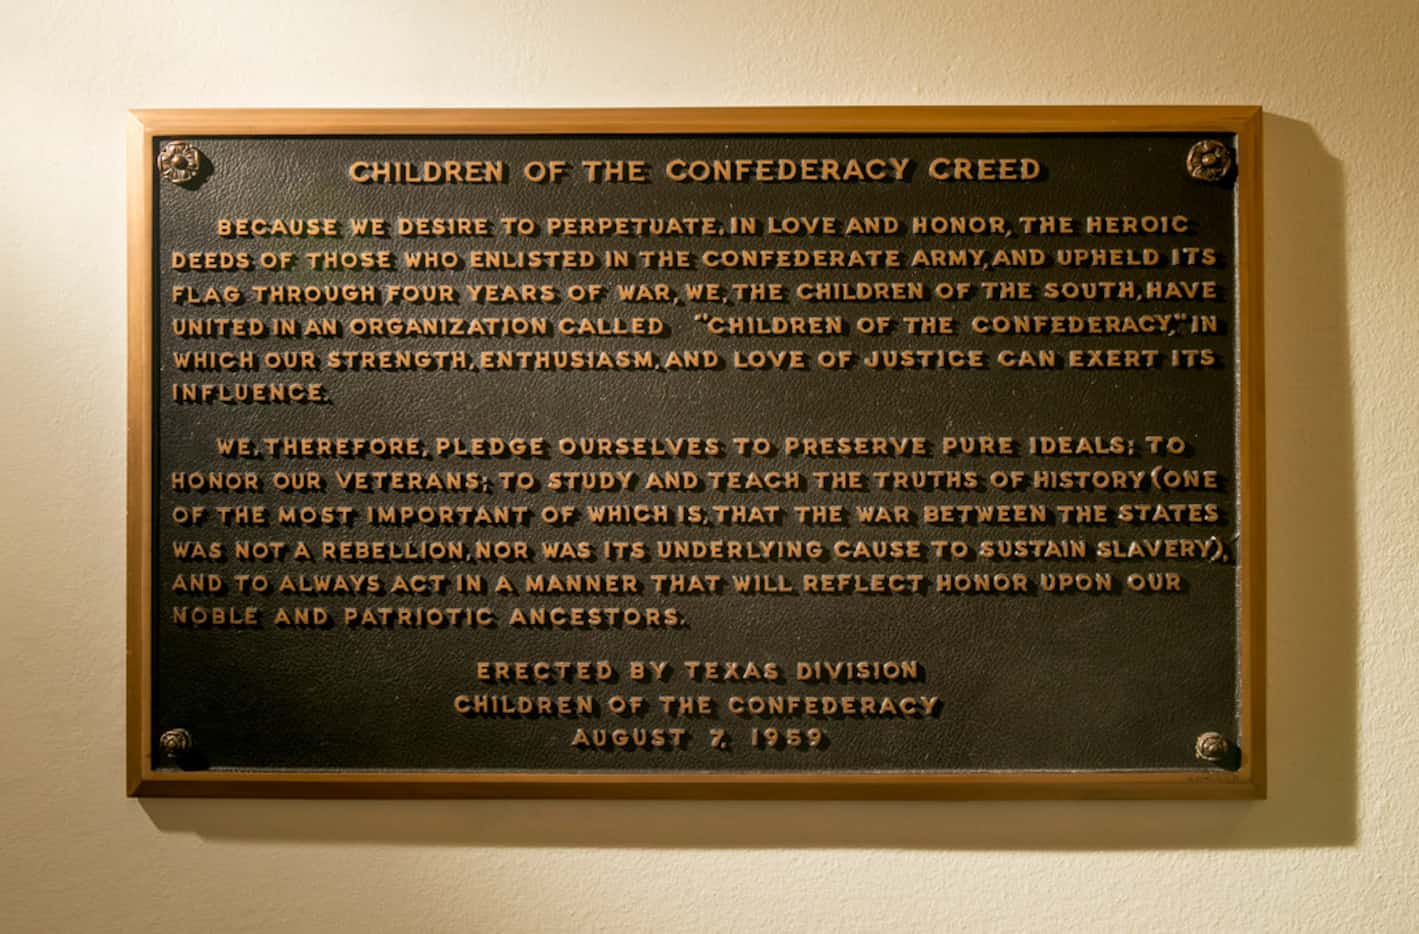 The "Children of the Confederacy Creed" plaque is on display at the Capitol in Austin.